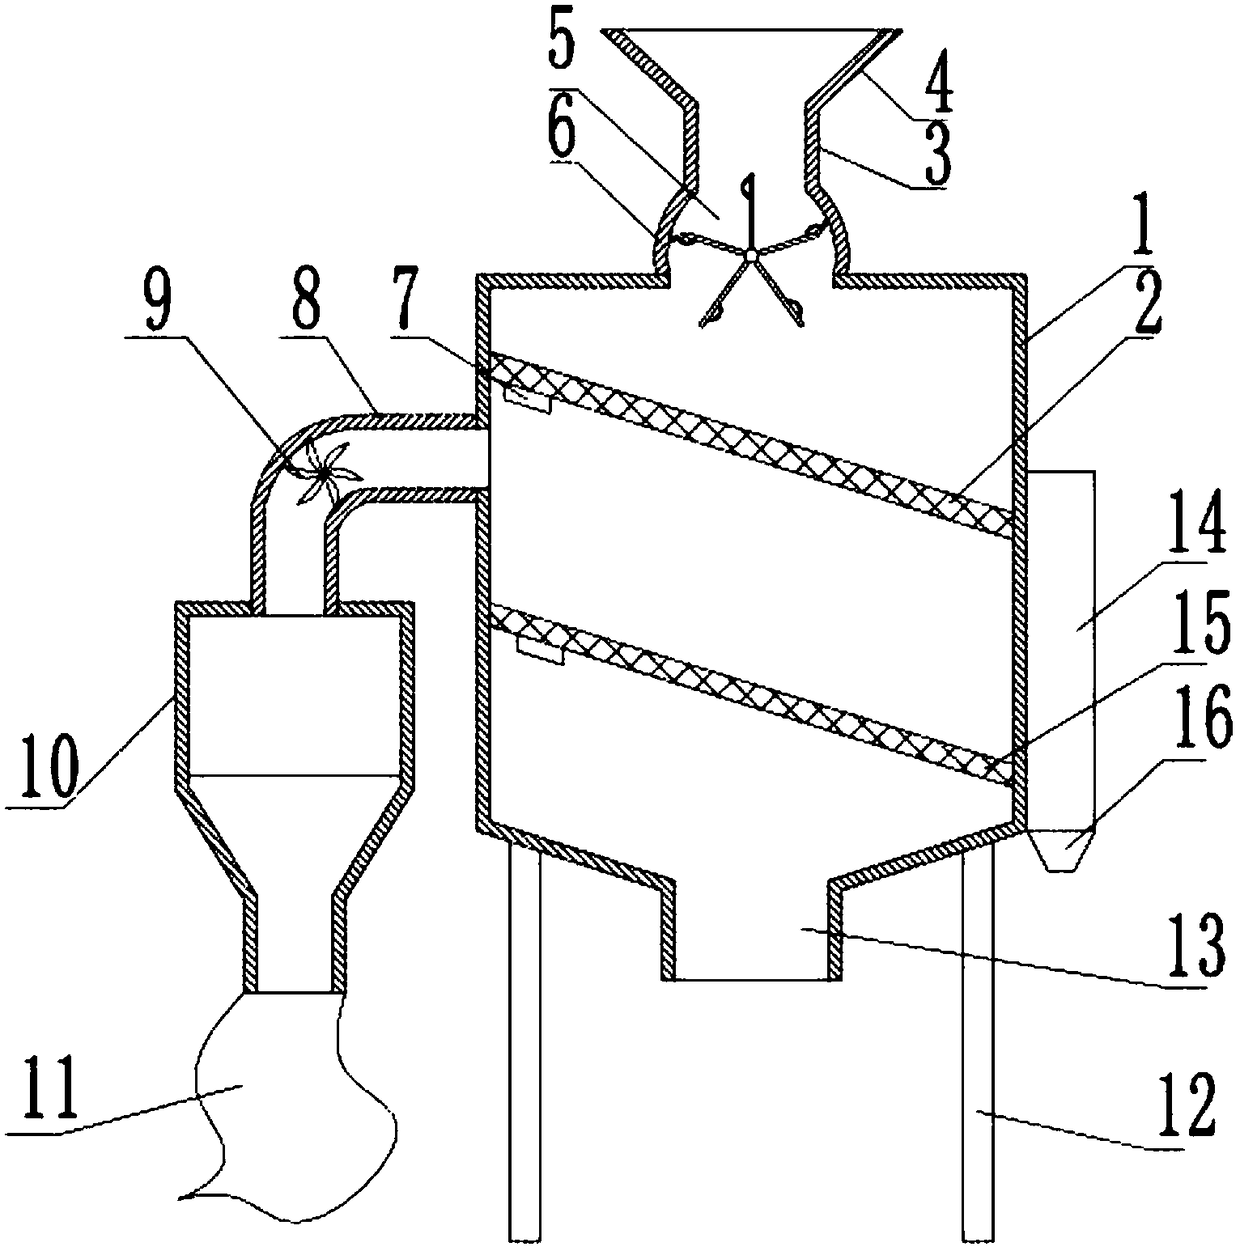 Feed screening device stable in blanking